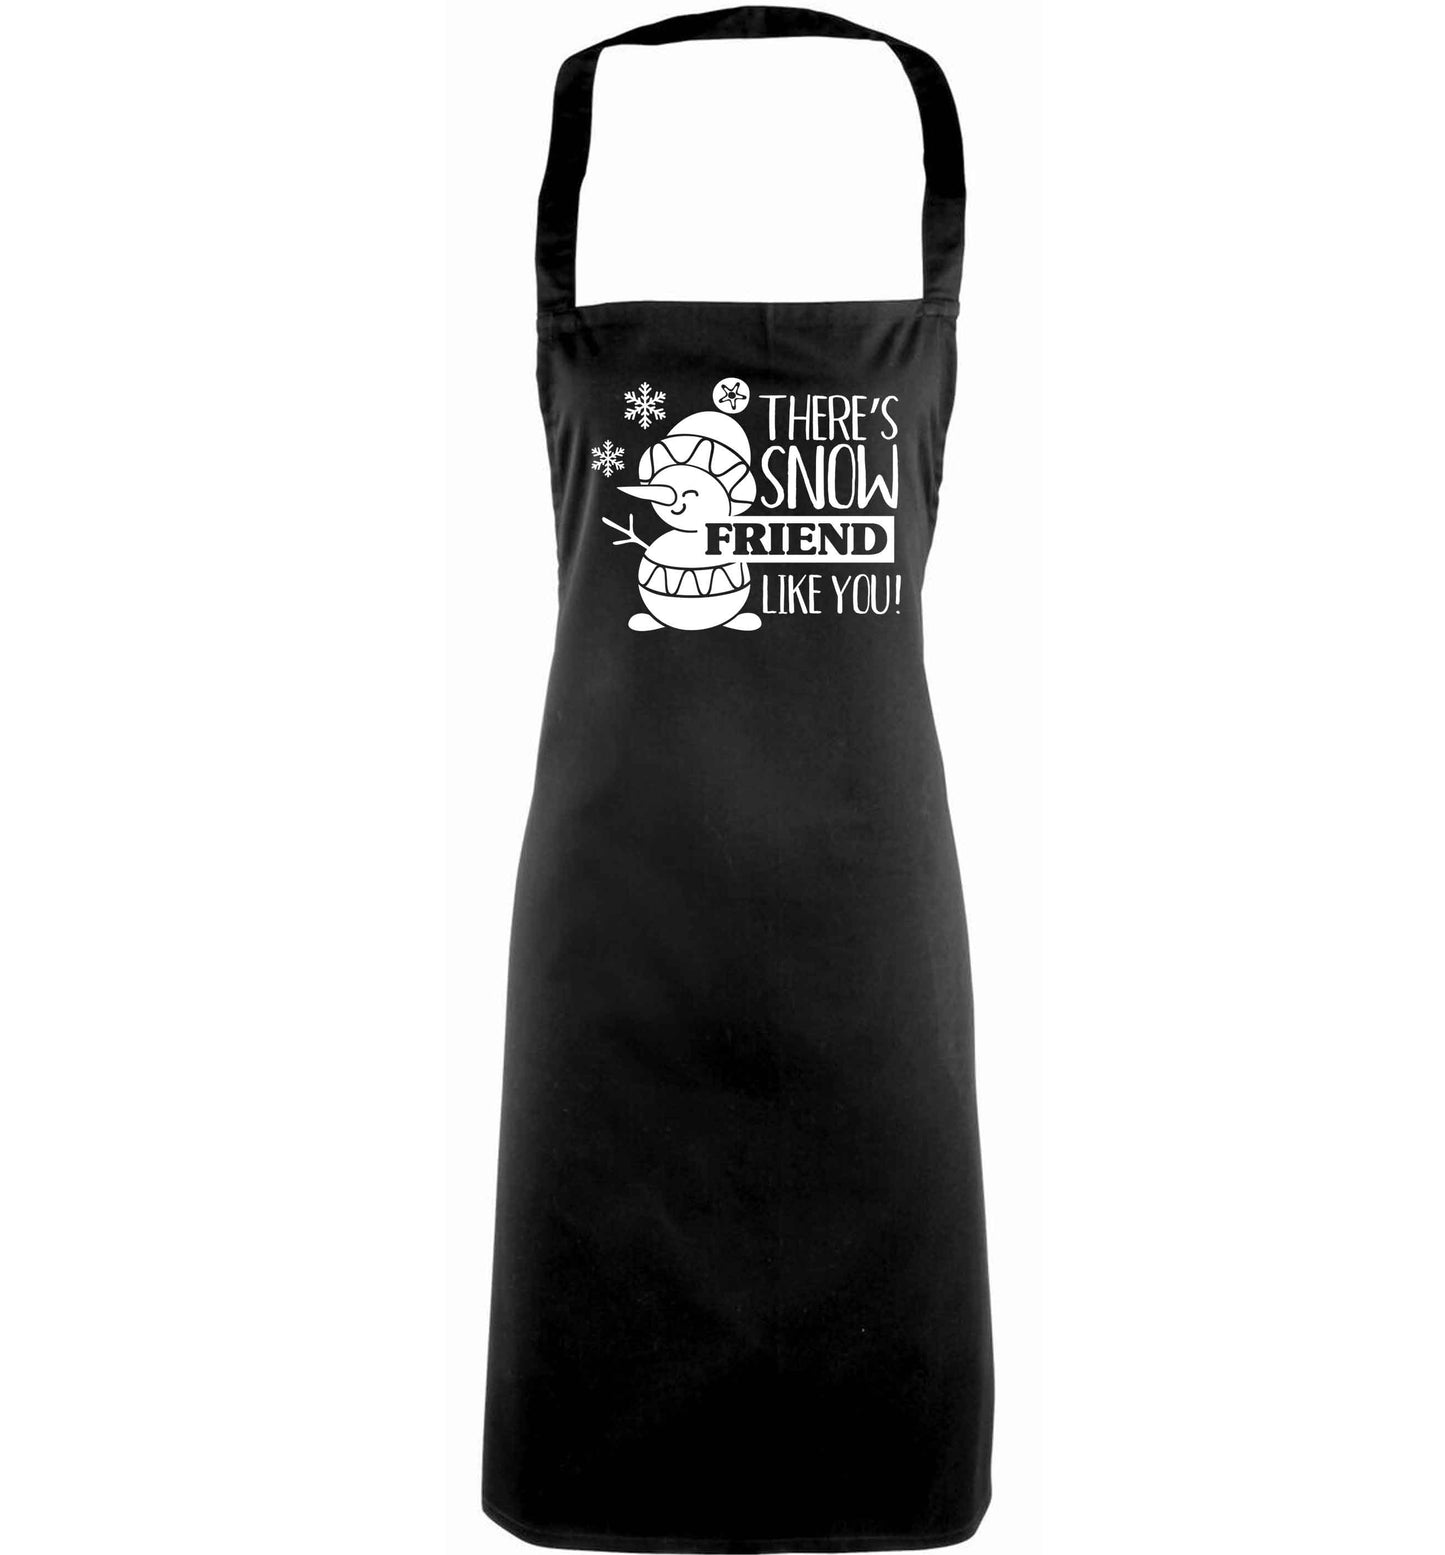 There's snow friend like you adults black apron